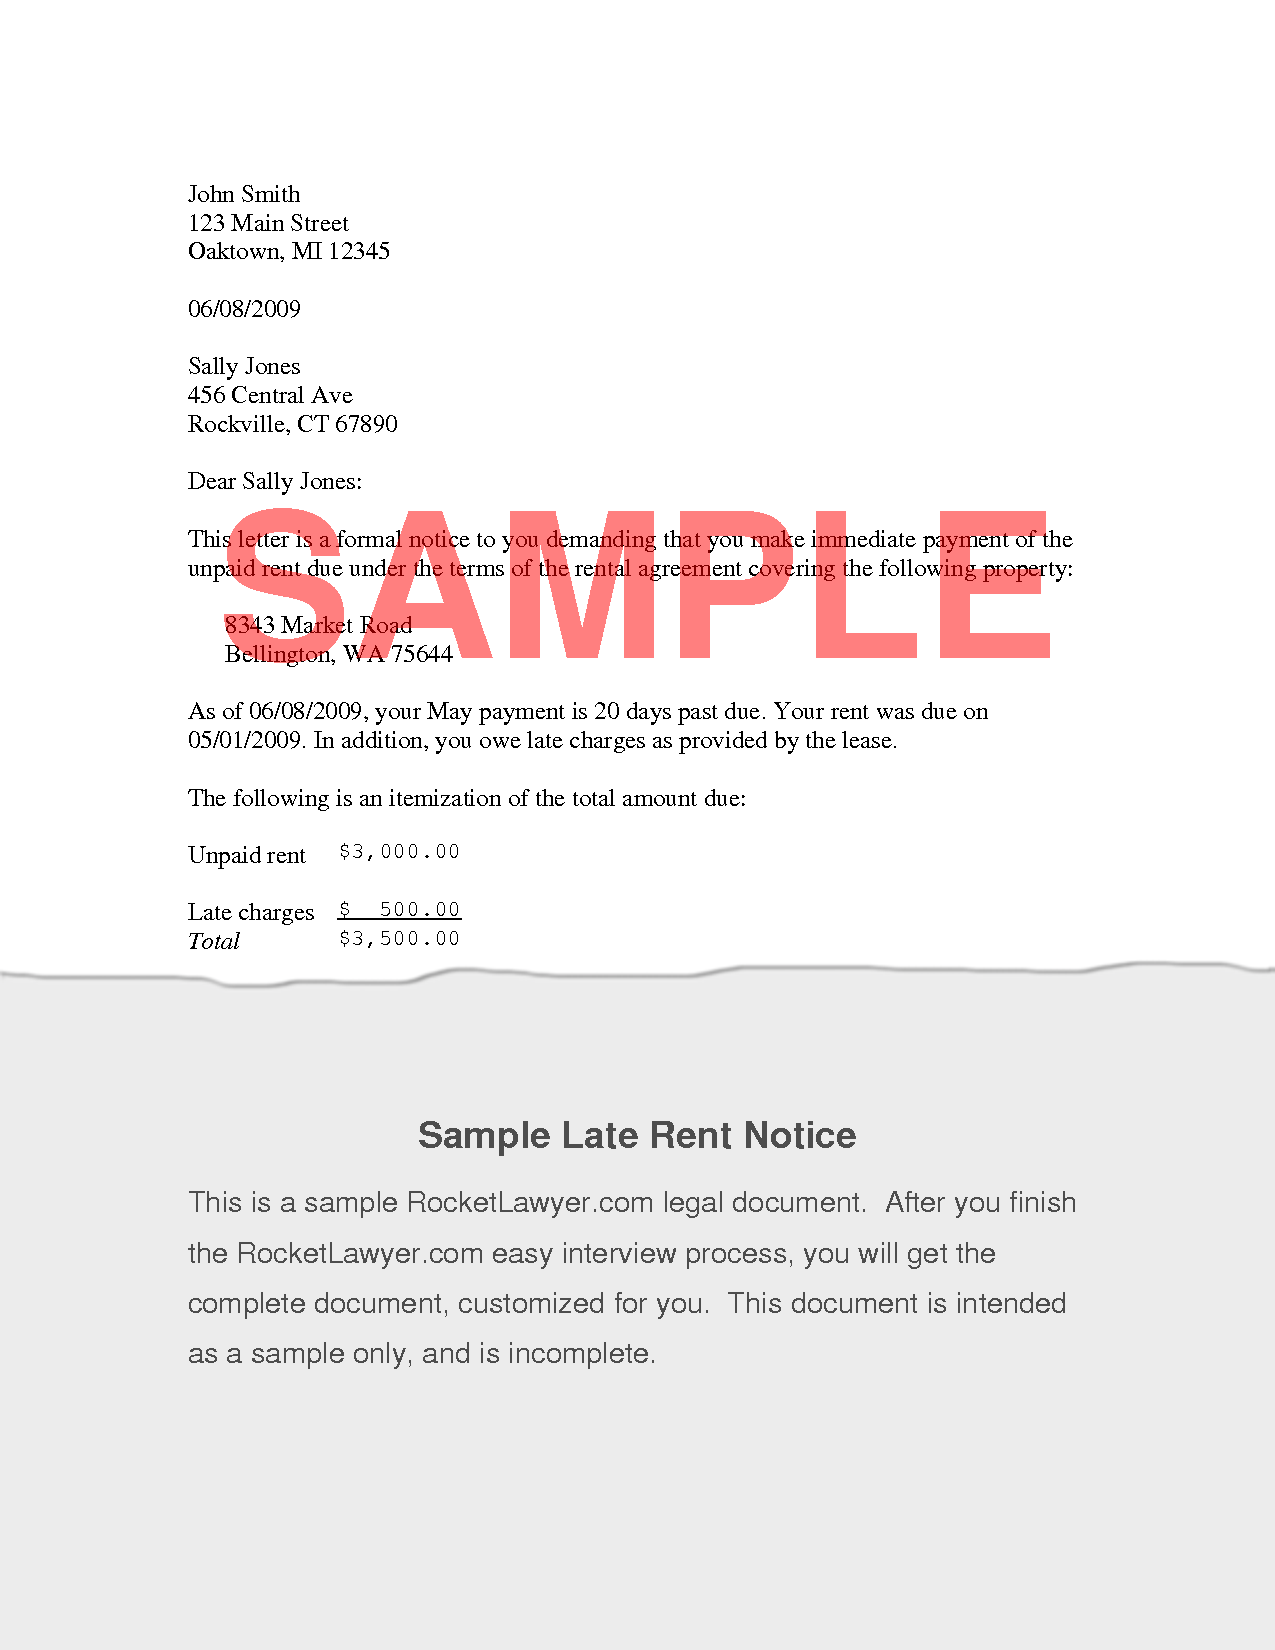 Late Payment Notice Free Printable Documents